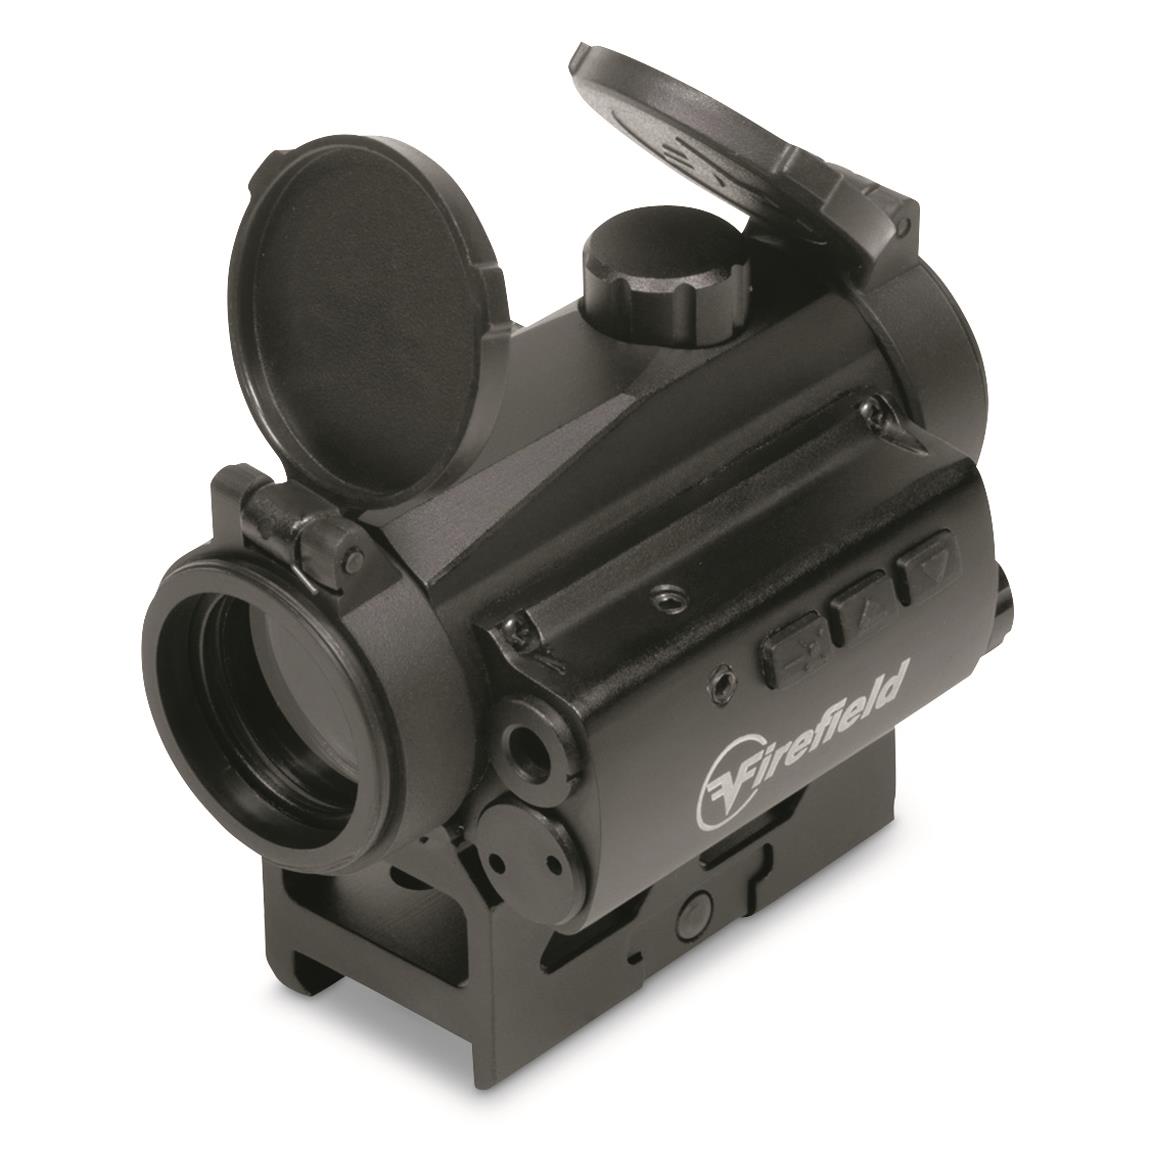 Firefield Impulse 1x22mm, Compact Red Dot Sight, Red Laser